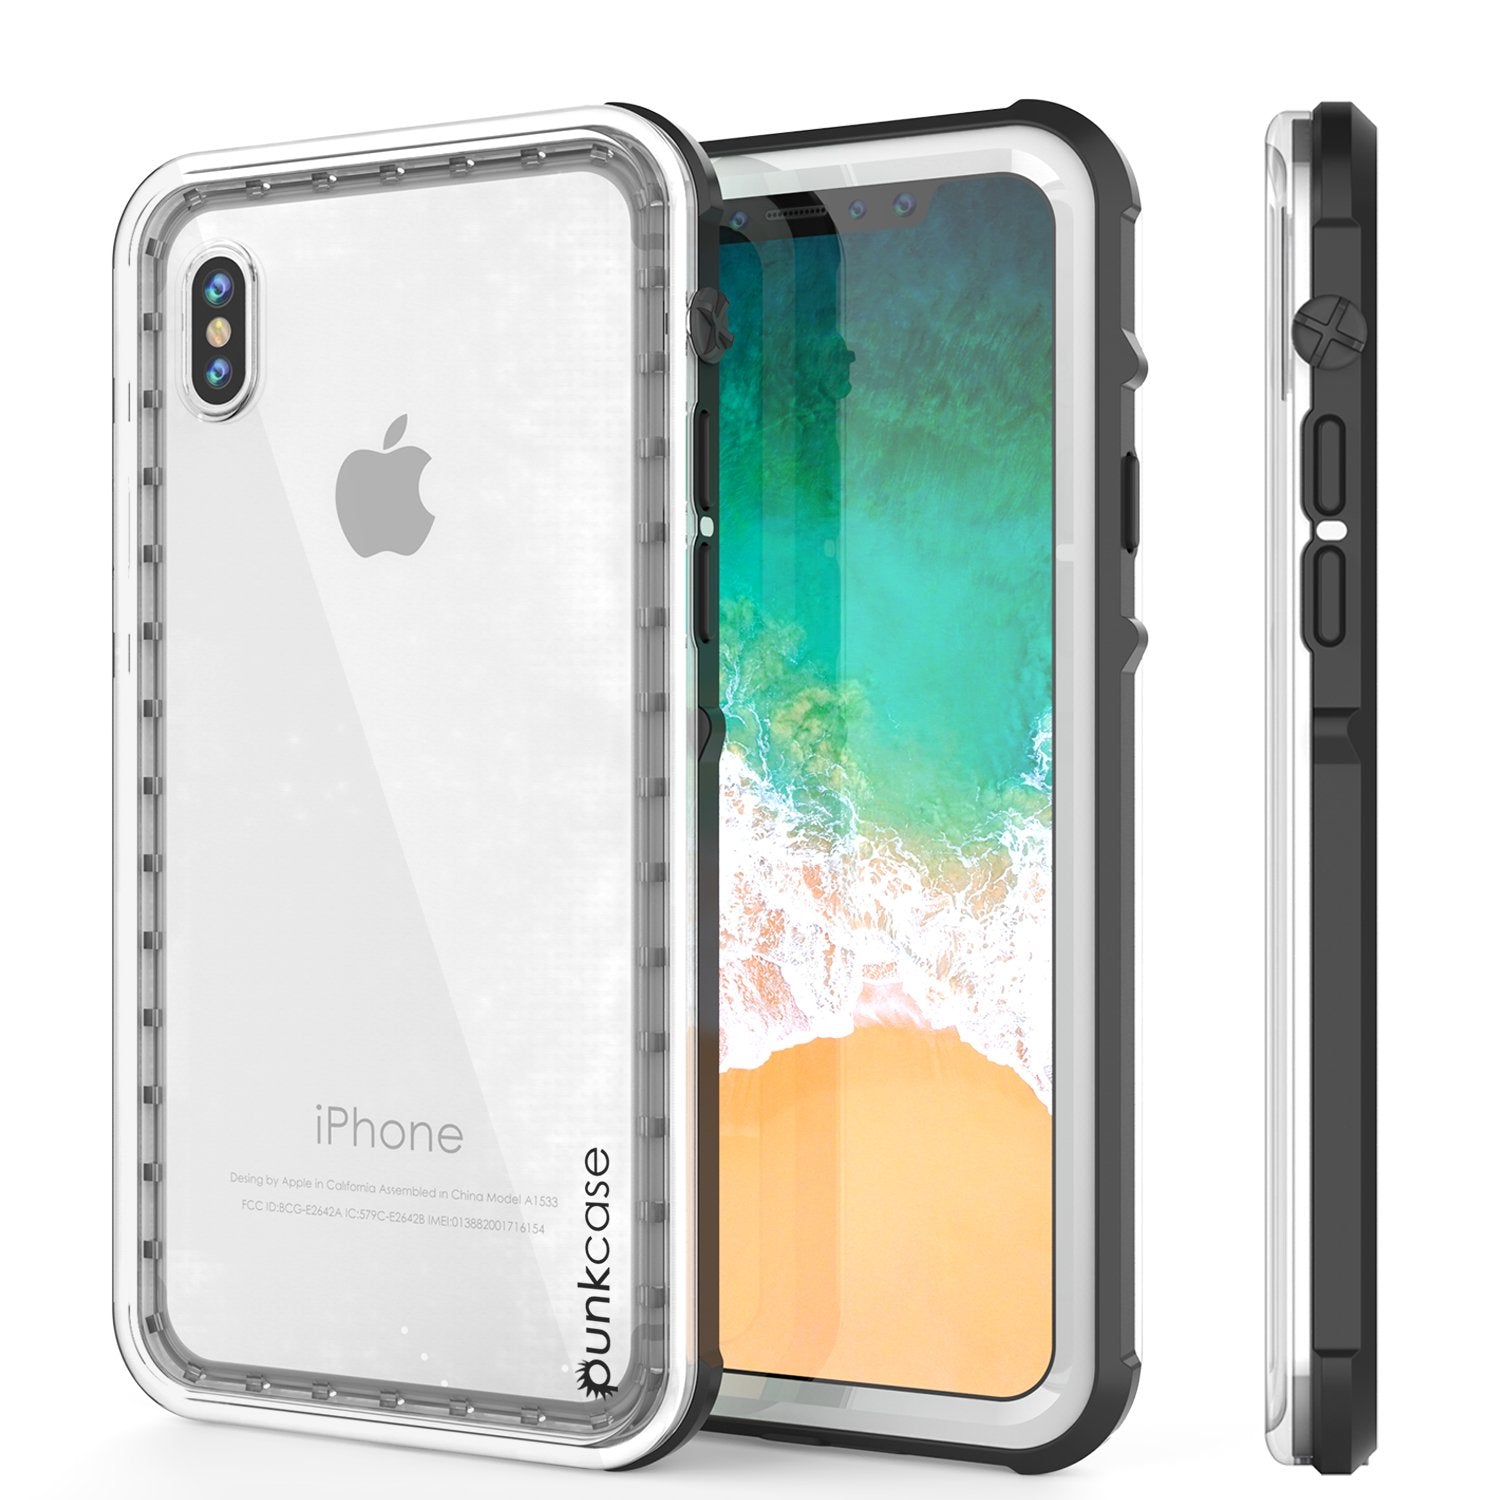 iPhone X Case, PUNKCase [CRYSTAL SERIES] Protective IP68 Certified, Ultra Slim Fit [White]